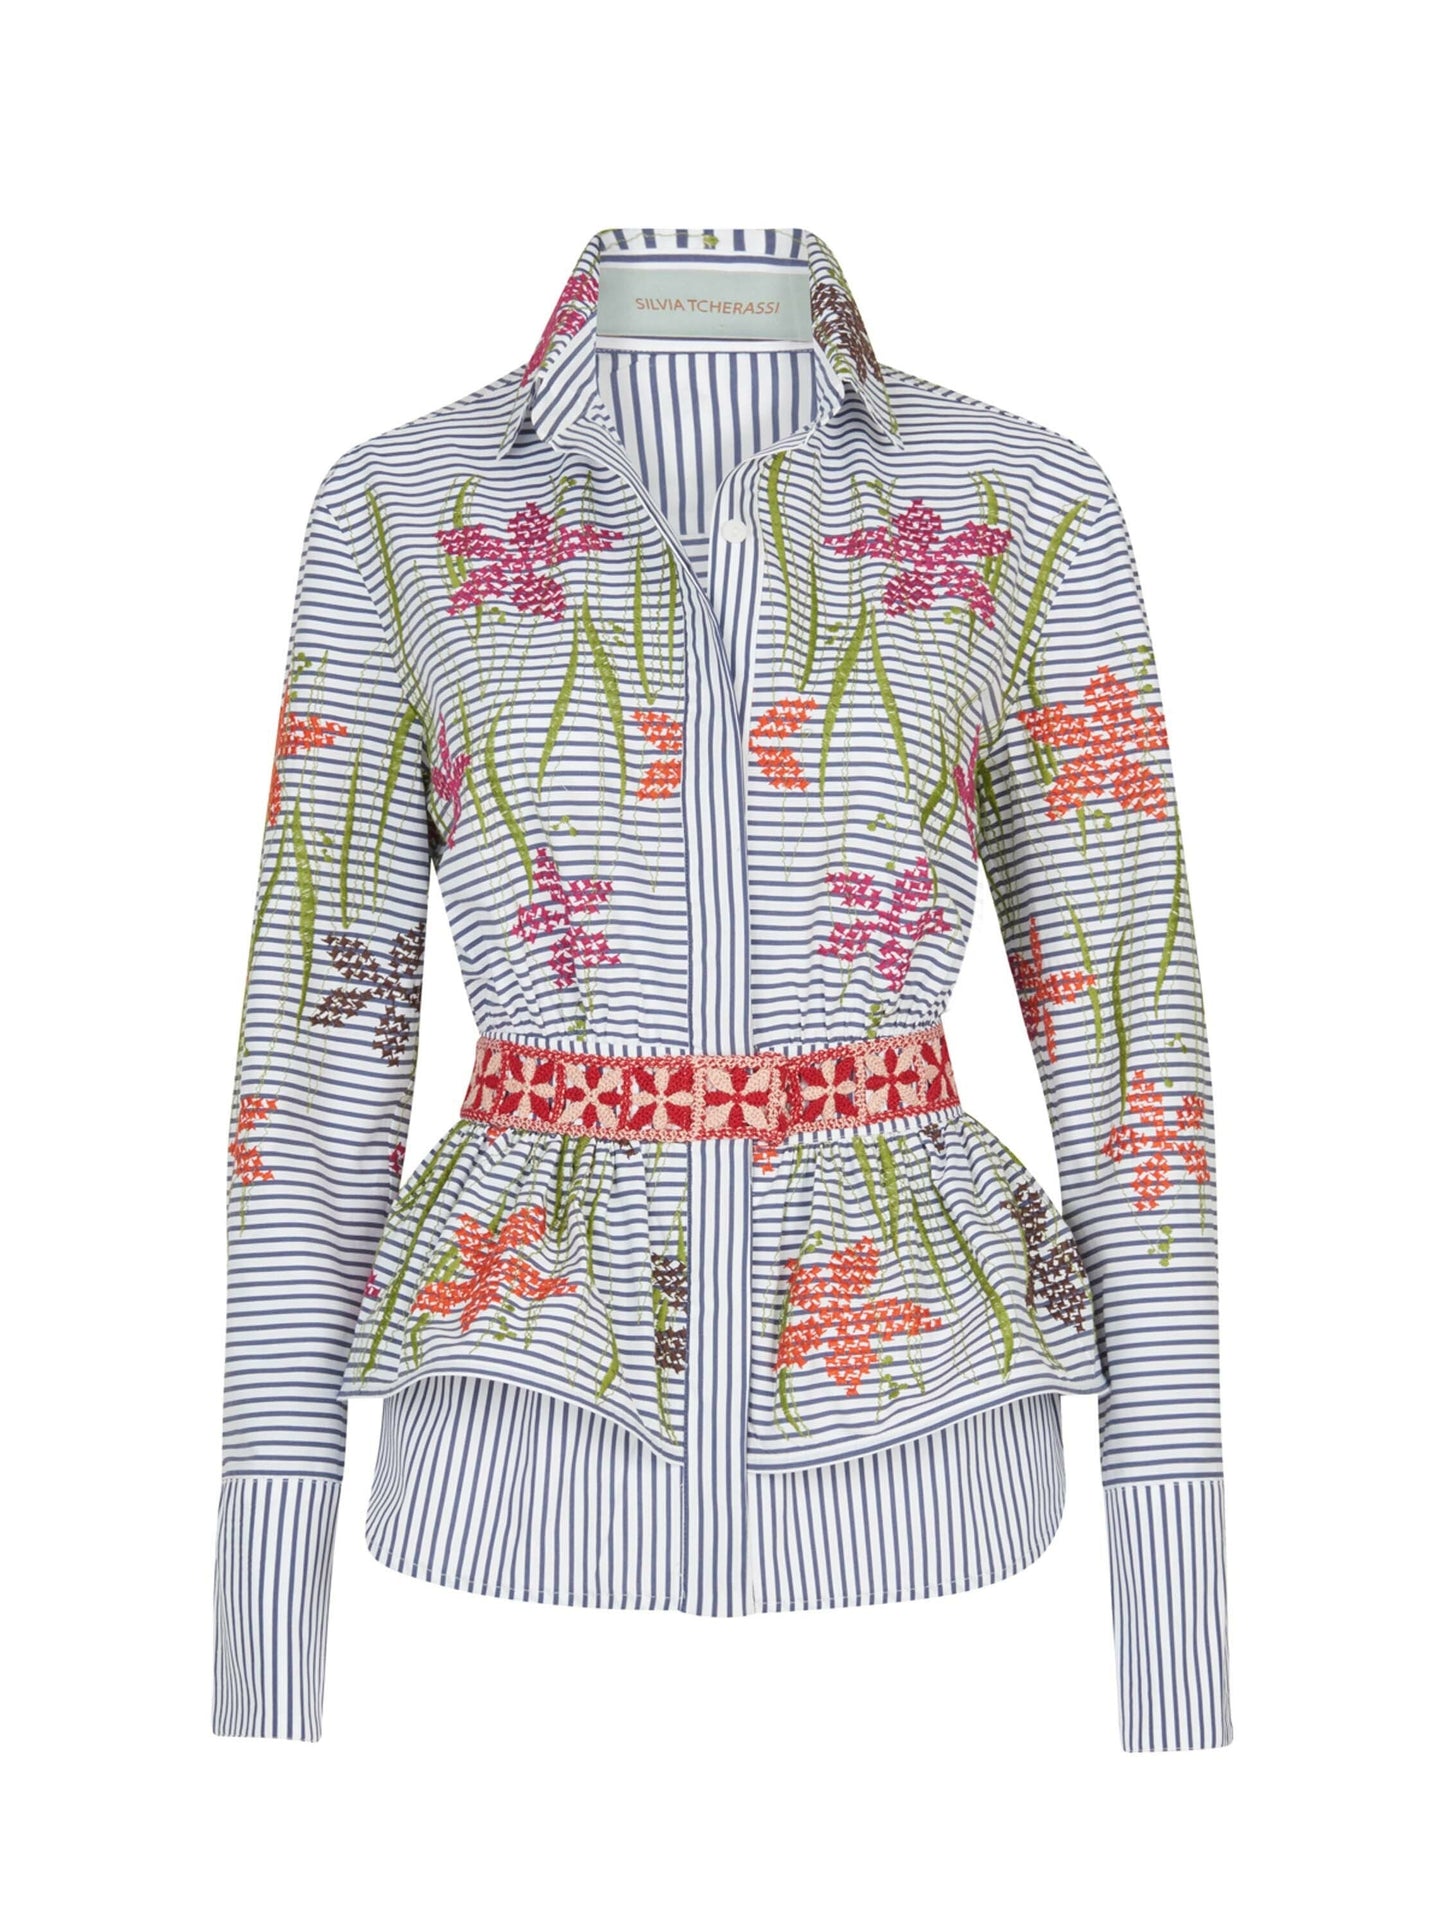 A Fiona Blouse Blue Pinstripe with floral embroidery.